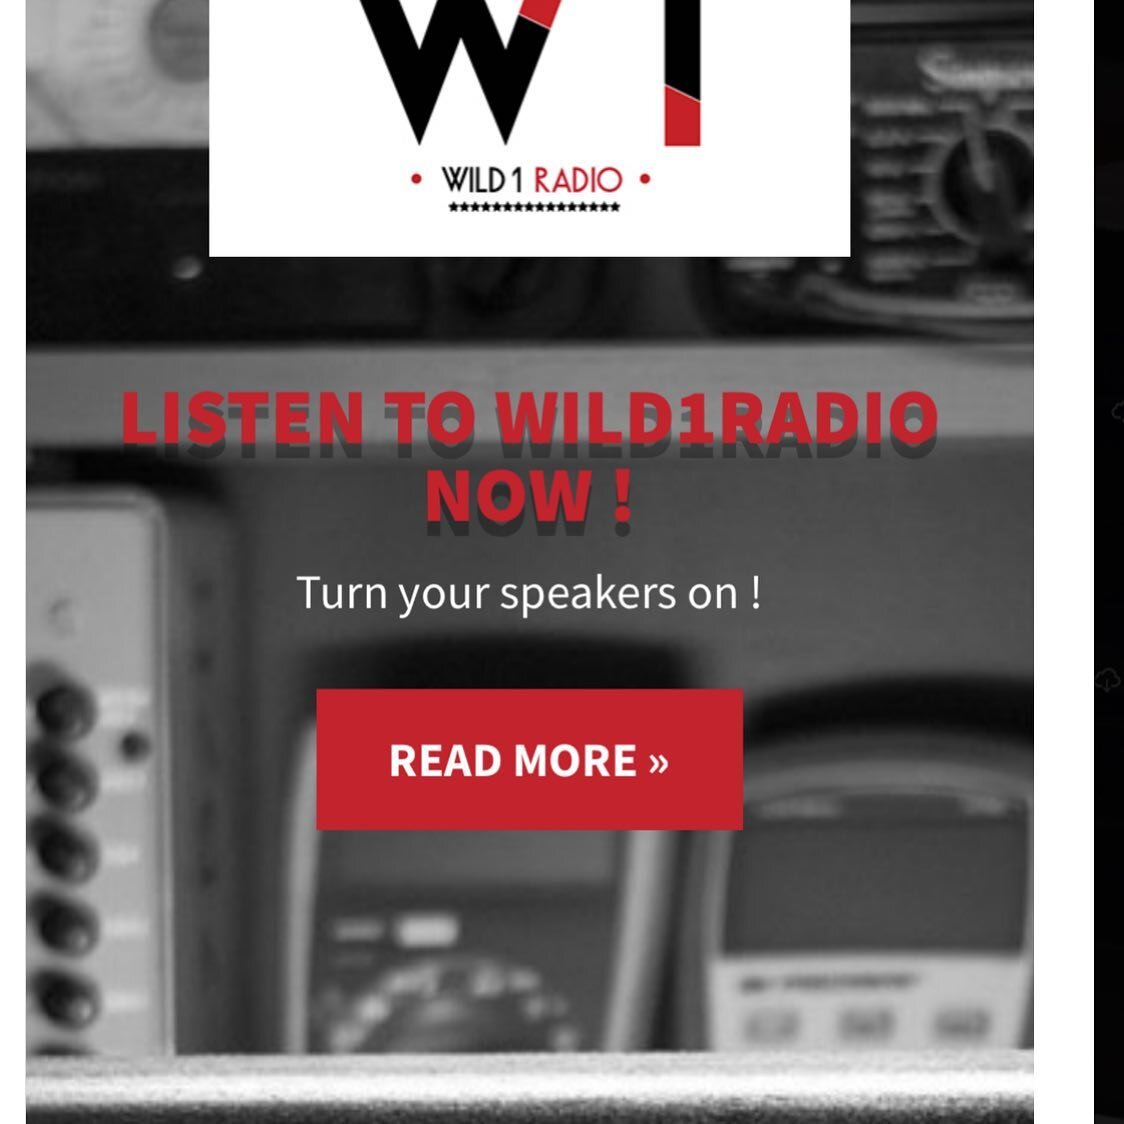 &ldquo;Under Water&rdquo; - A song Sara Santilli and I co-wrote and produced featuring her vocals is playing on Wild1Radio.com today at 2pm and 10pm. Check it out! www.wild1radio.com &bull;
&bull;
&bull;
&bull;
#newsong #musicproducer #summersong #re